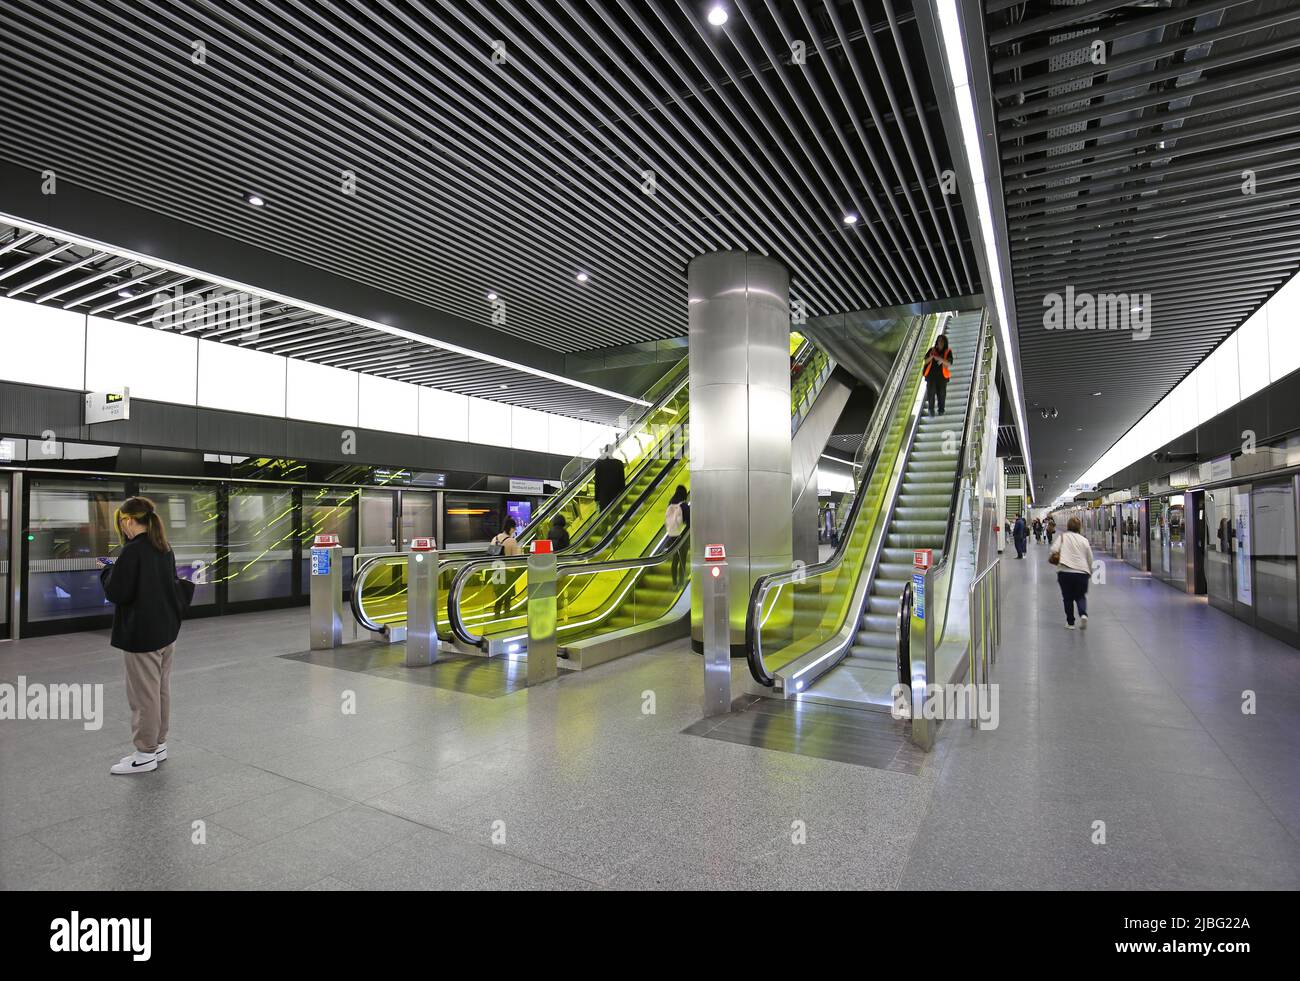 London, UK, new Elizabeth Line (Crossrail) station at Canary Wharf. Platform level view showing safety screens, passengers & escalator to ticket hall. Stock Photo